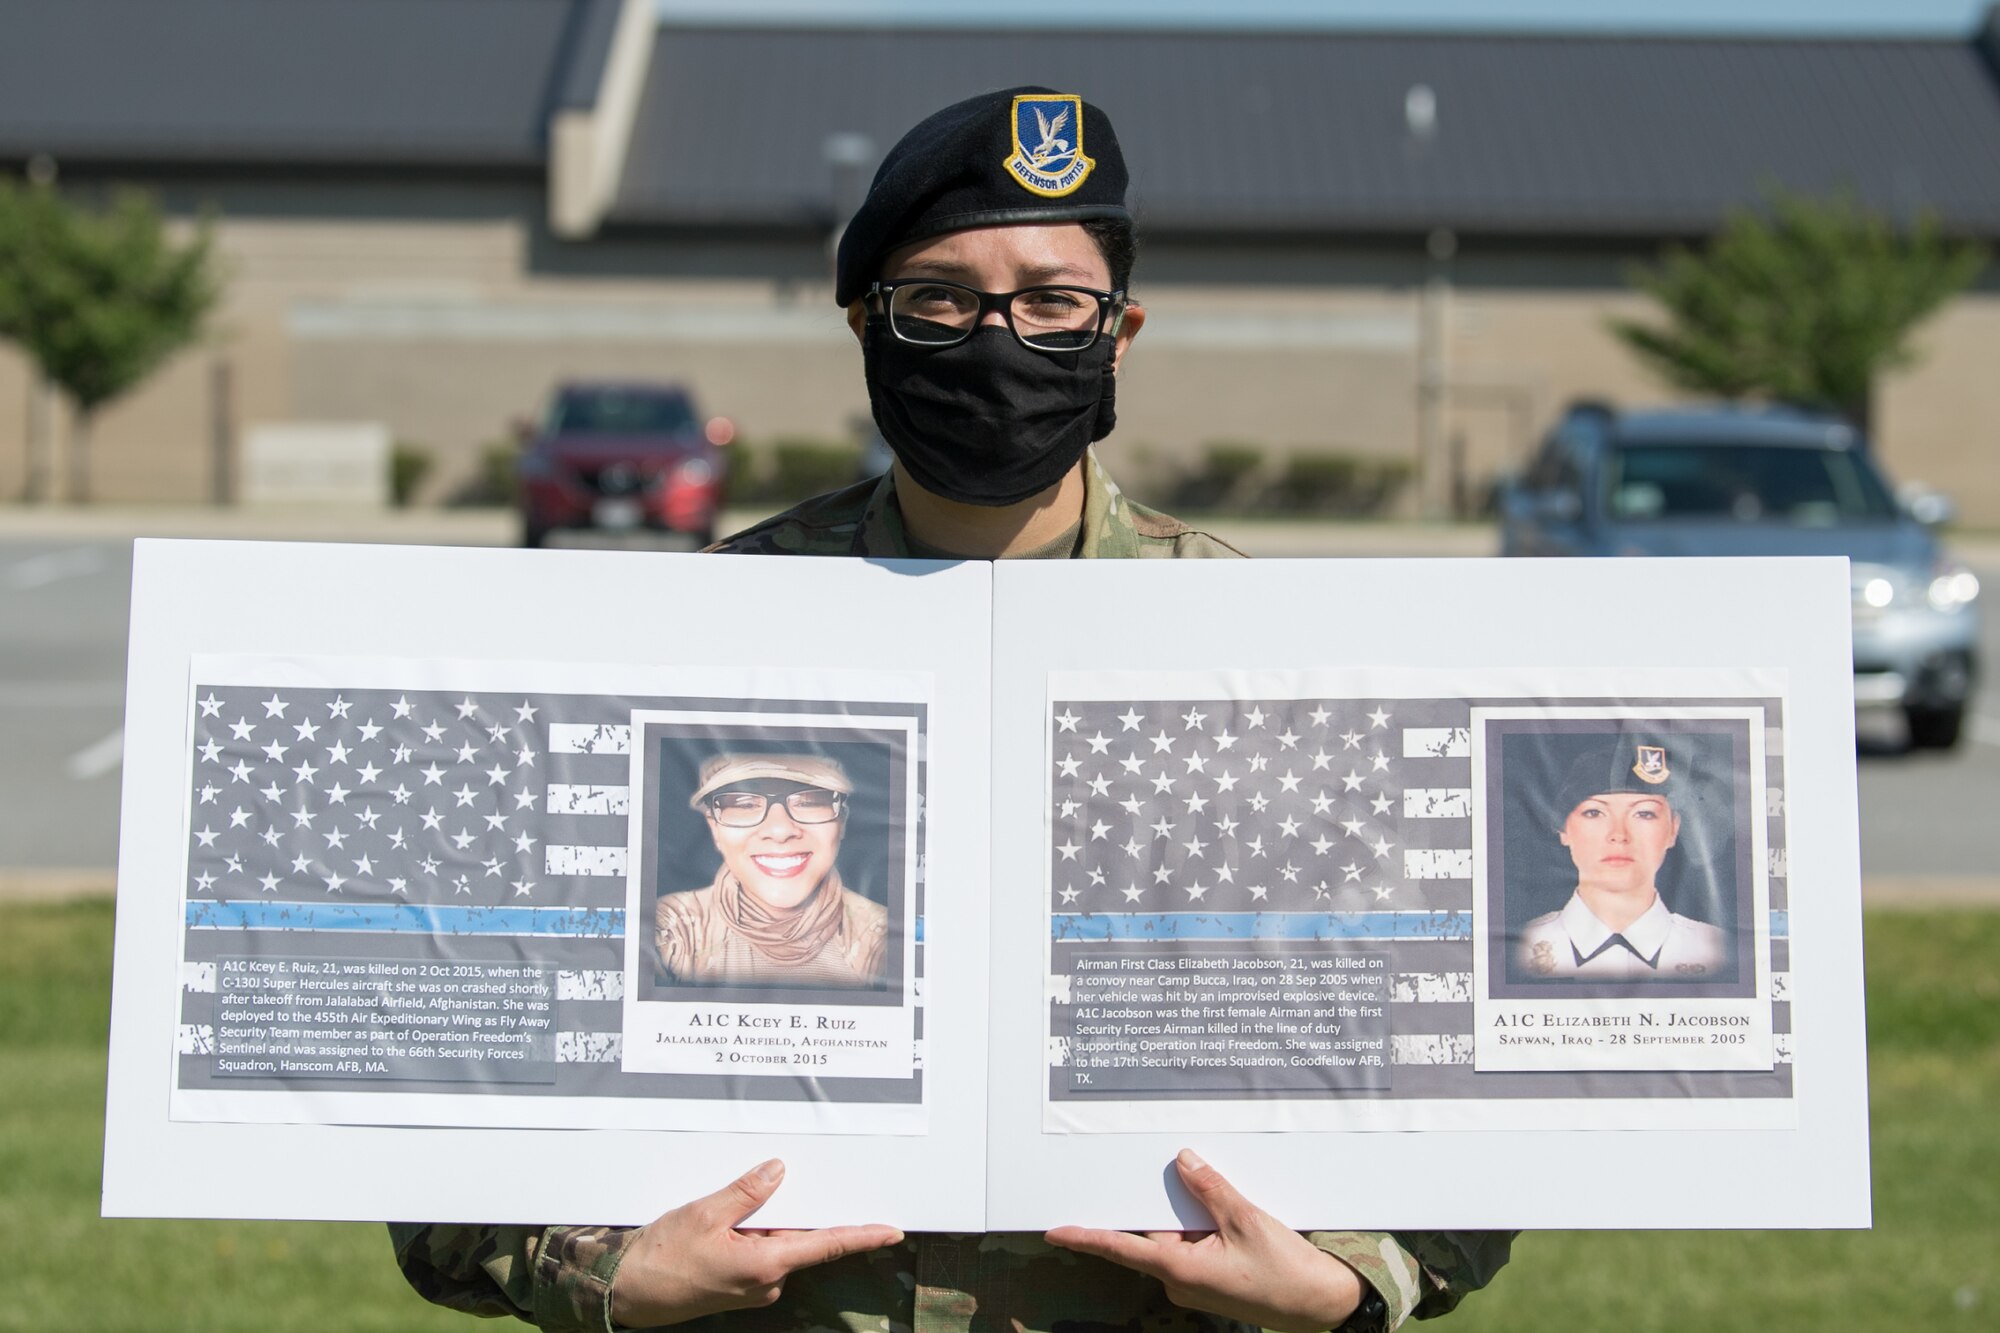 Senior Airman Theresa Braack, 436th Security Forces Squadron military working dog handler, holds photos of two fallen defenders during a retreat ceremony on Peace Officers Memorial Day May 15, 2020, at Dover Air Force Base, Delaware. The ceremony commemorating fallen military and civilian law enforcement officers marked the end of National Police Week 2020. (U.S. Air Force photo by Mauricio Campino)